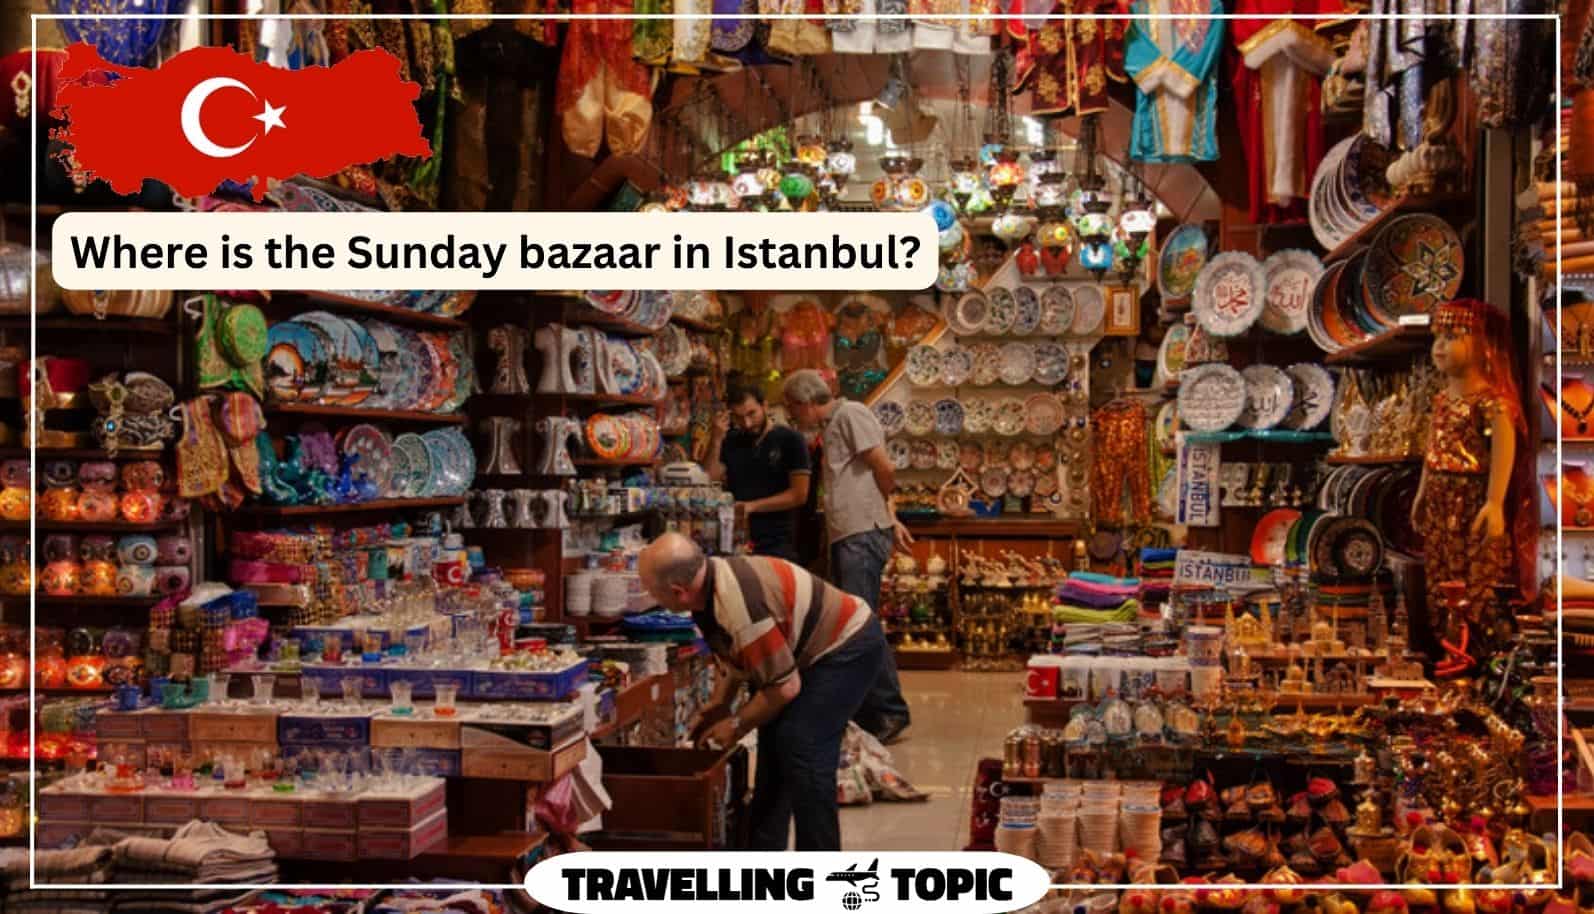 Where is the Sunday bazaar in Istanbul